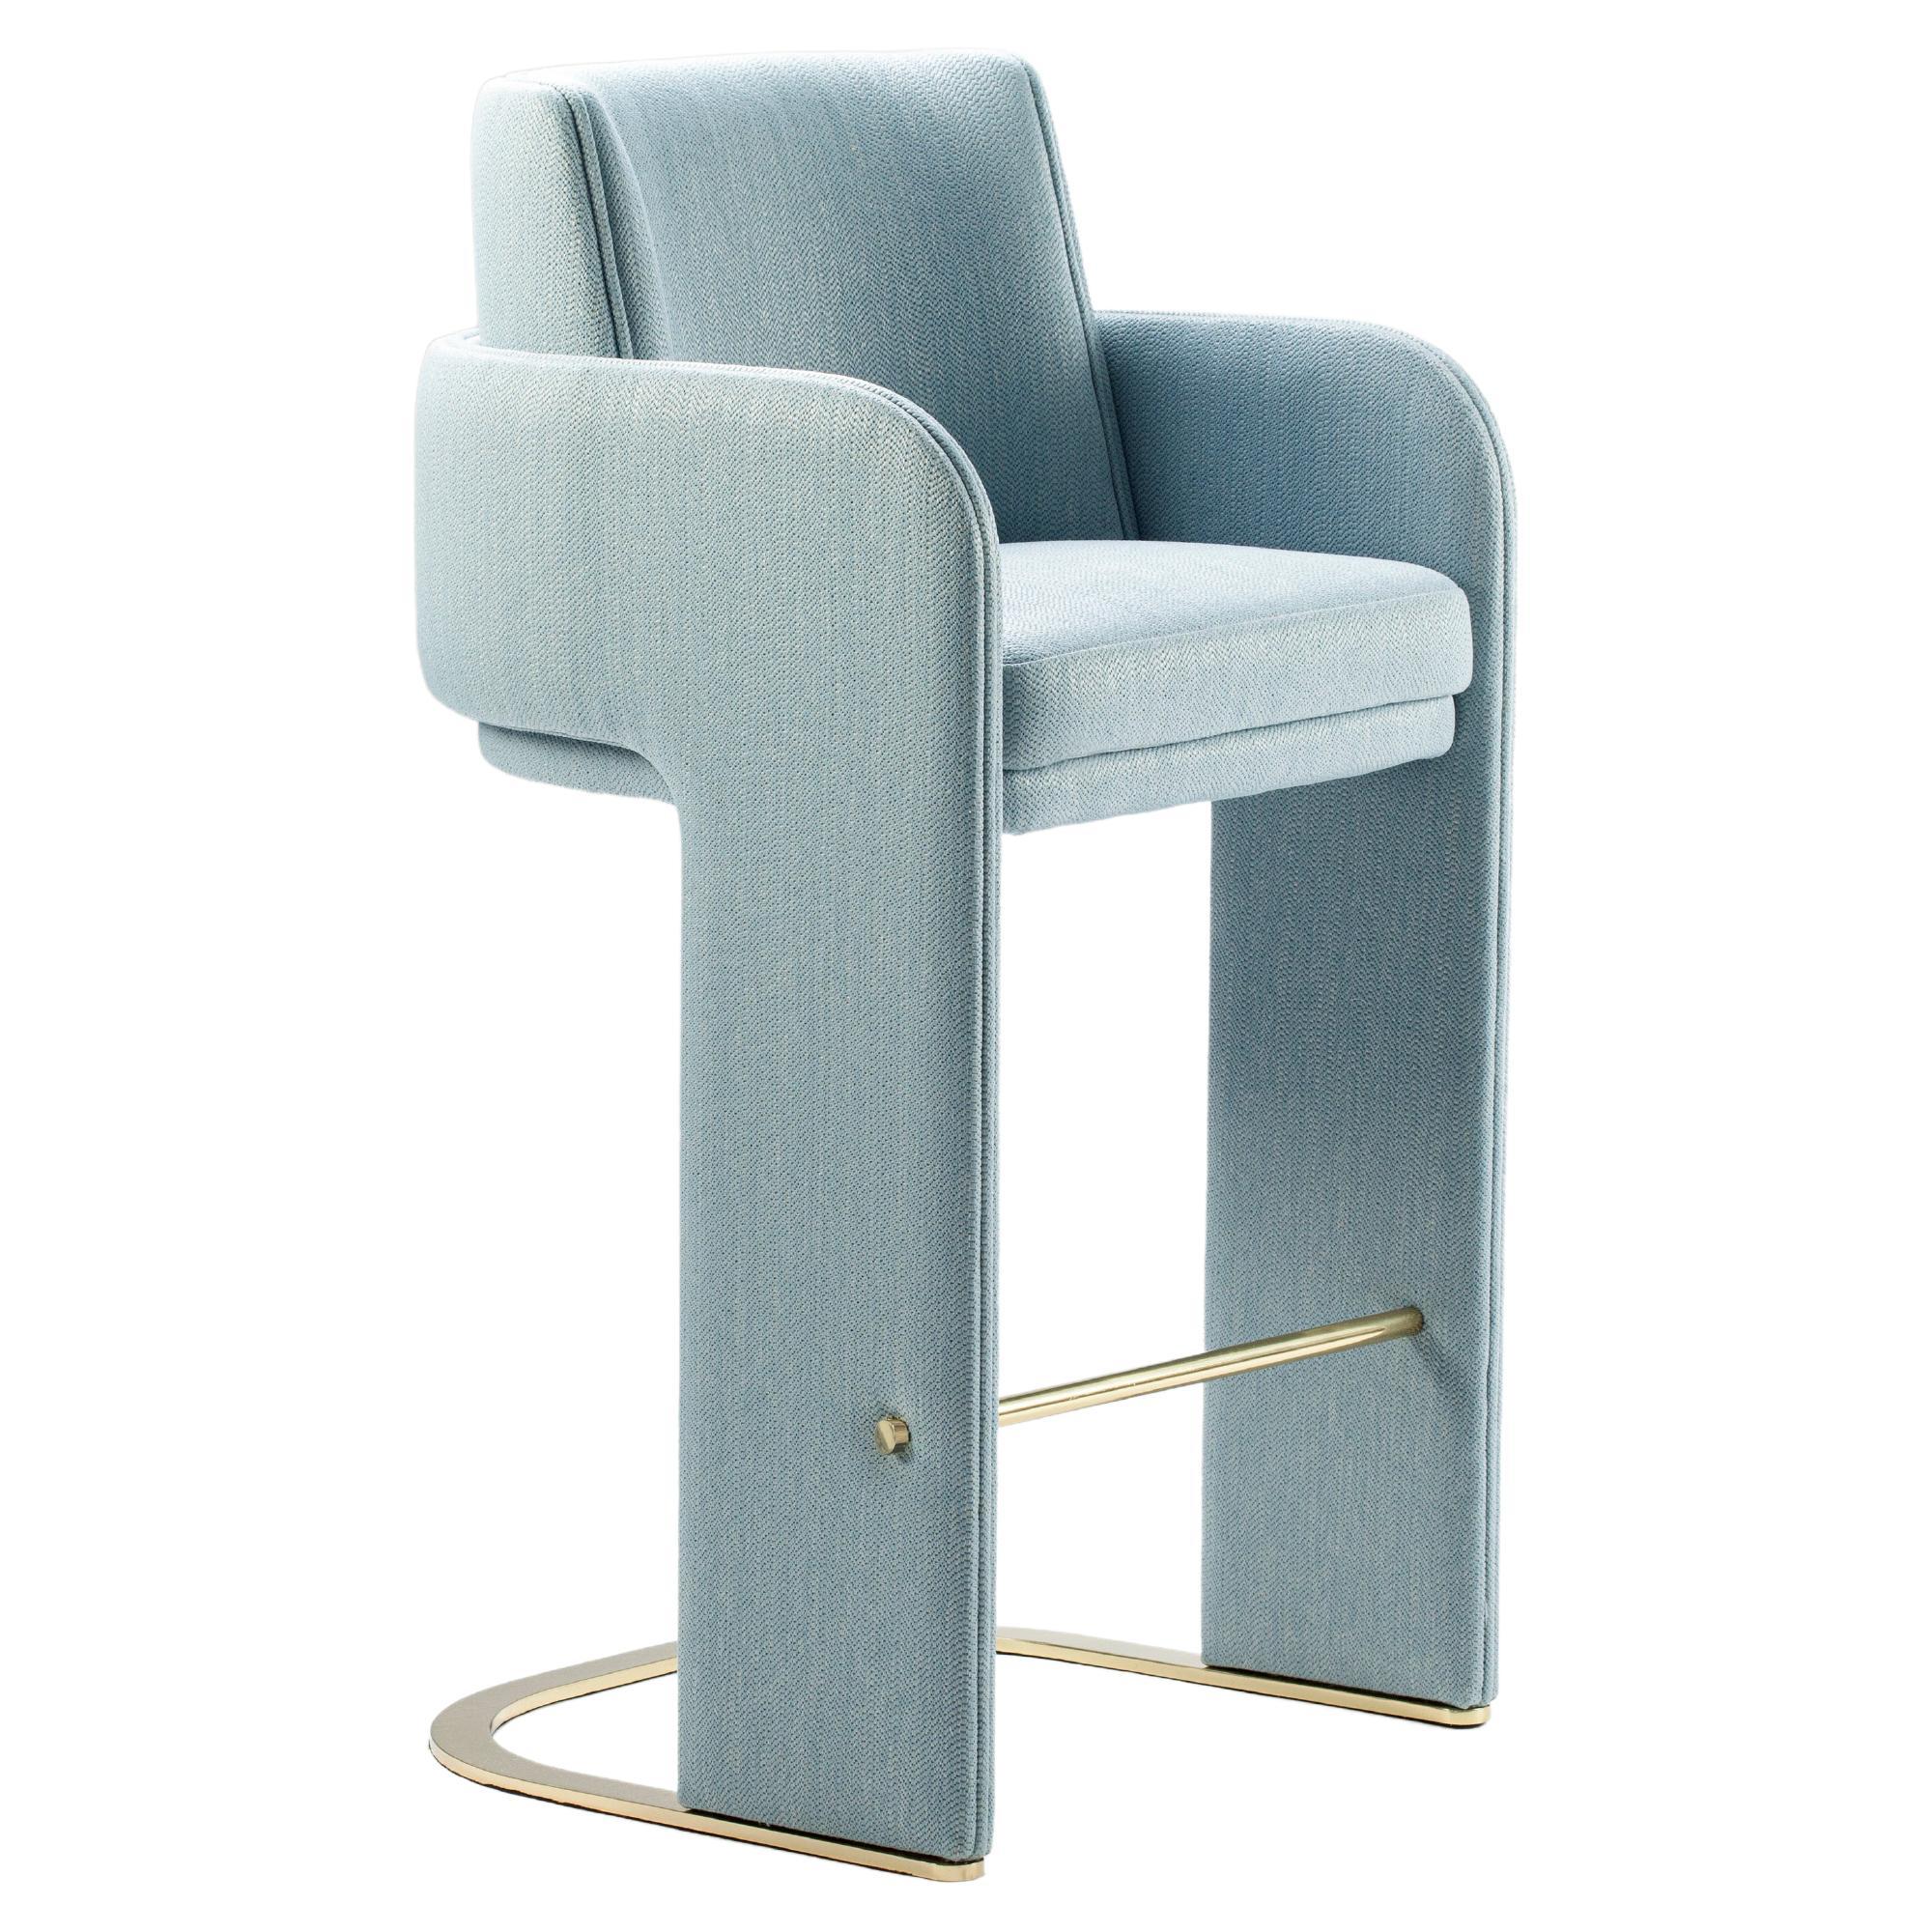 DOOQ Bar Chair with Soft Light Blue Fabric and Brass Footrest Odisseia For Sale